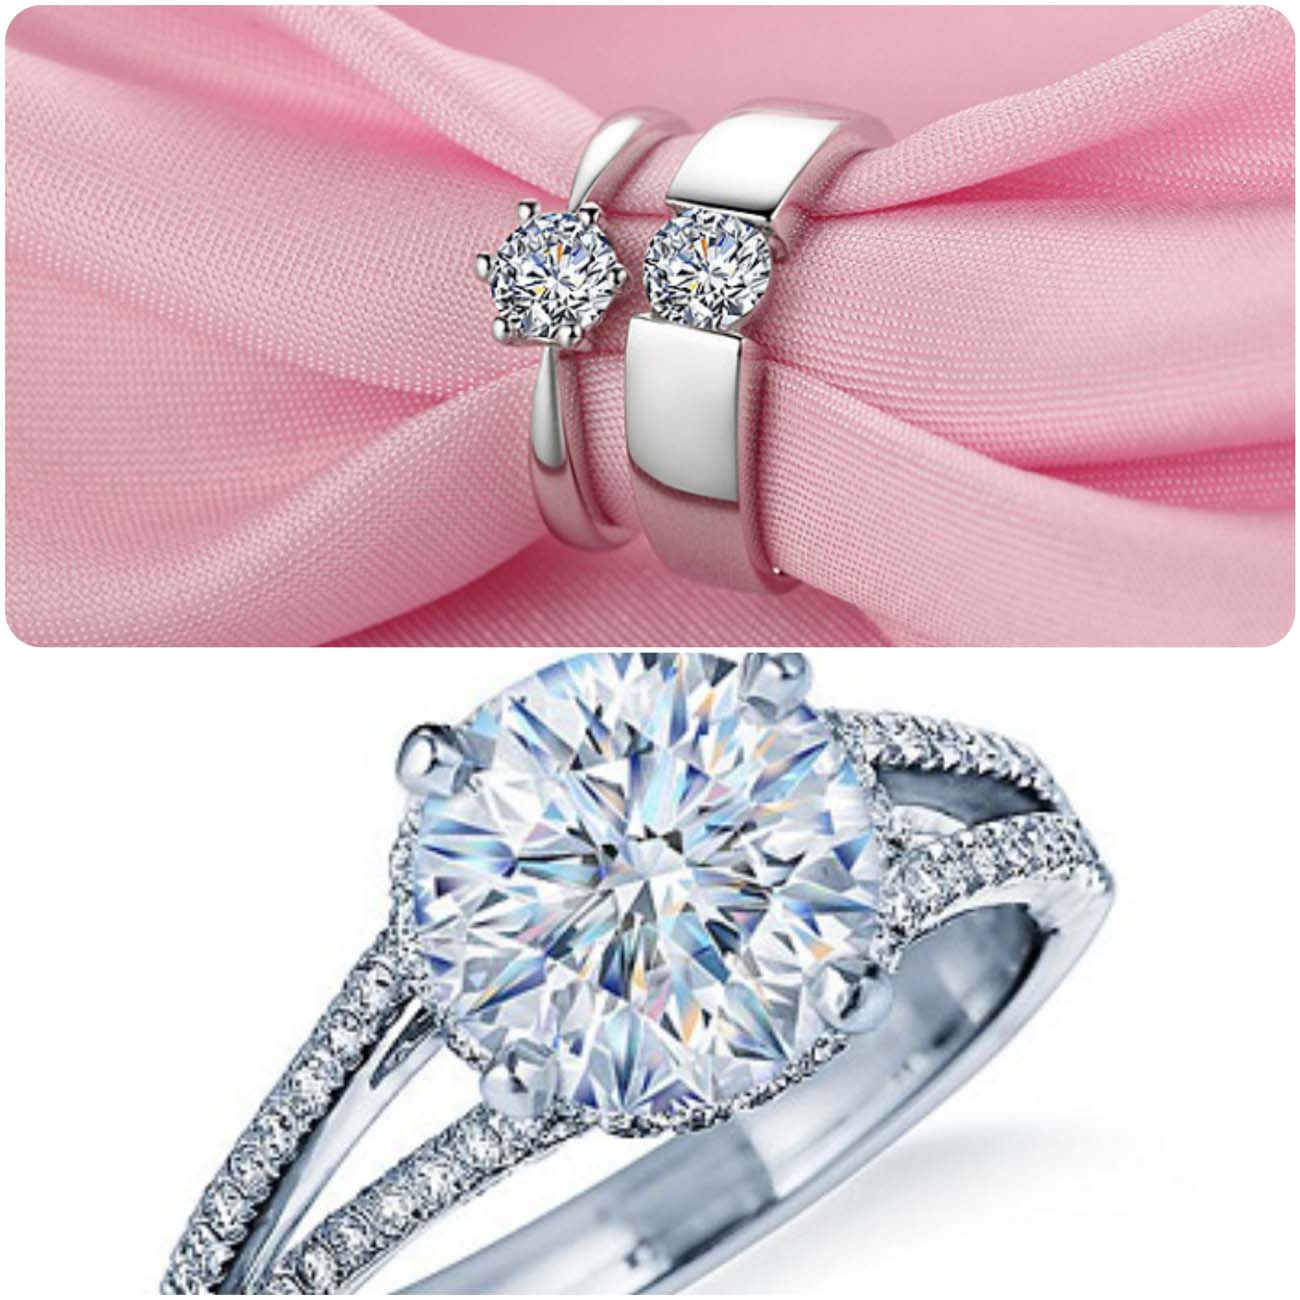 Latest Engagement Rings Designs & Styles For Men And Women 20162017